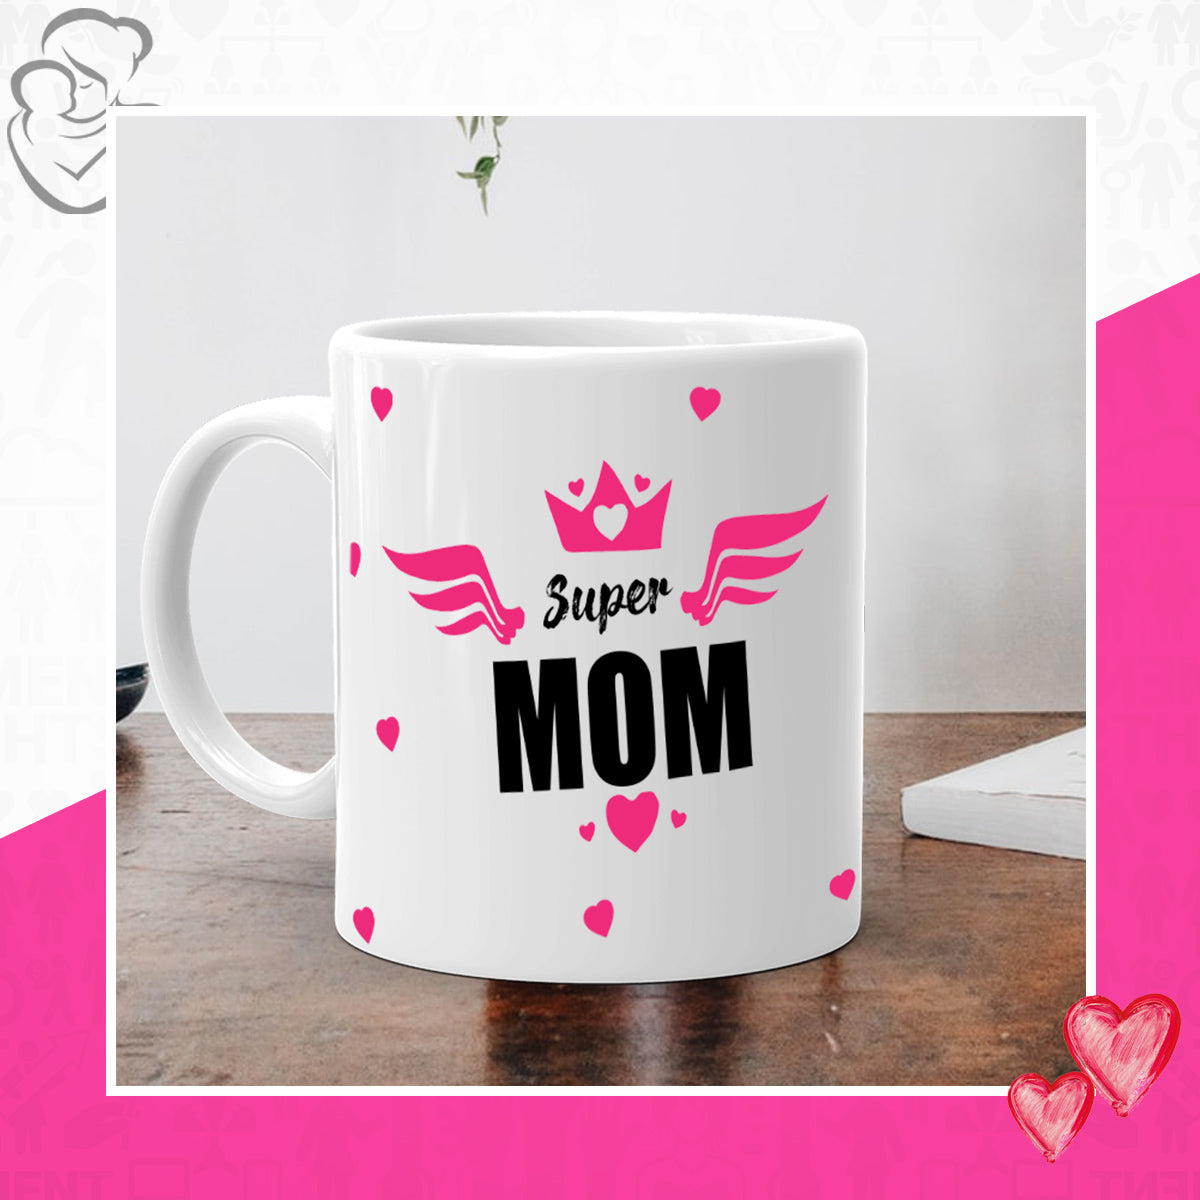 Send Mothers Day Gifts to Kolkata | Gifts @149 Same Day Delivery | Winni